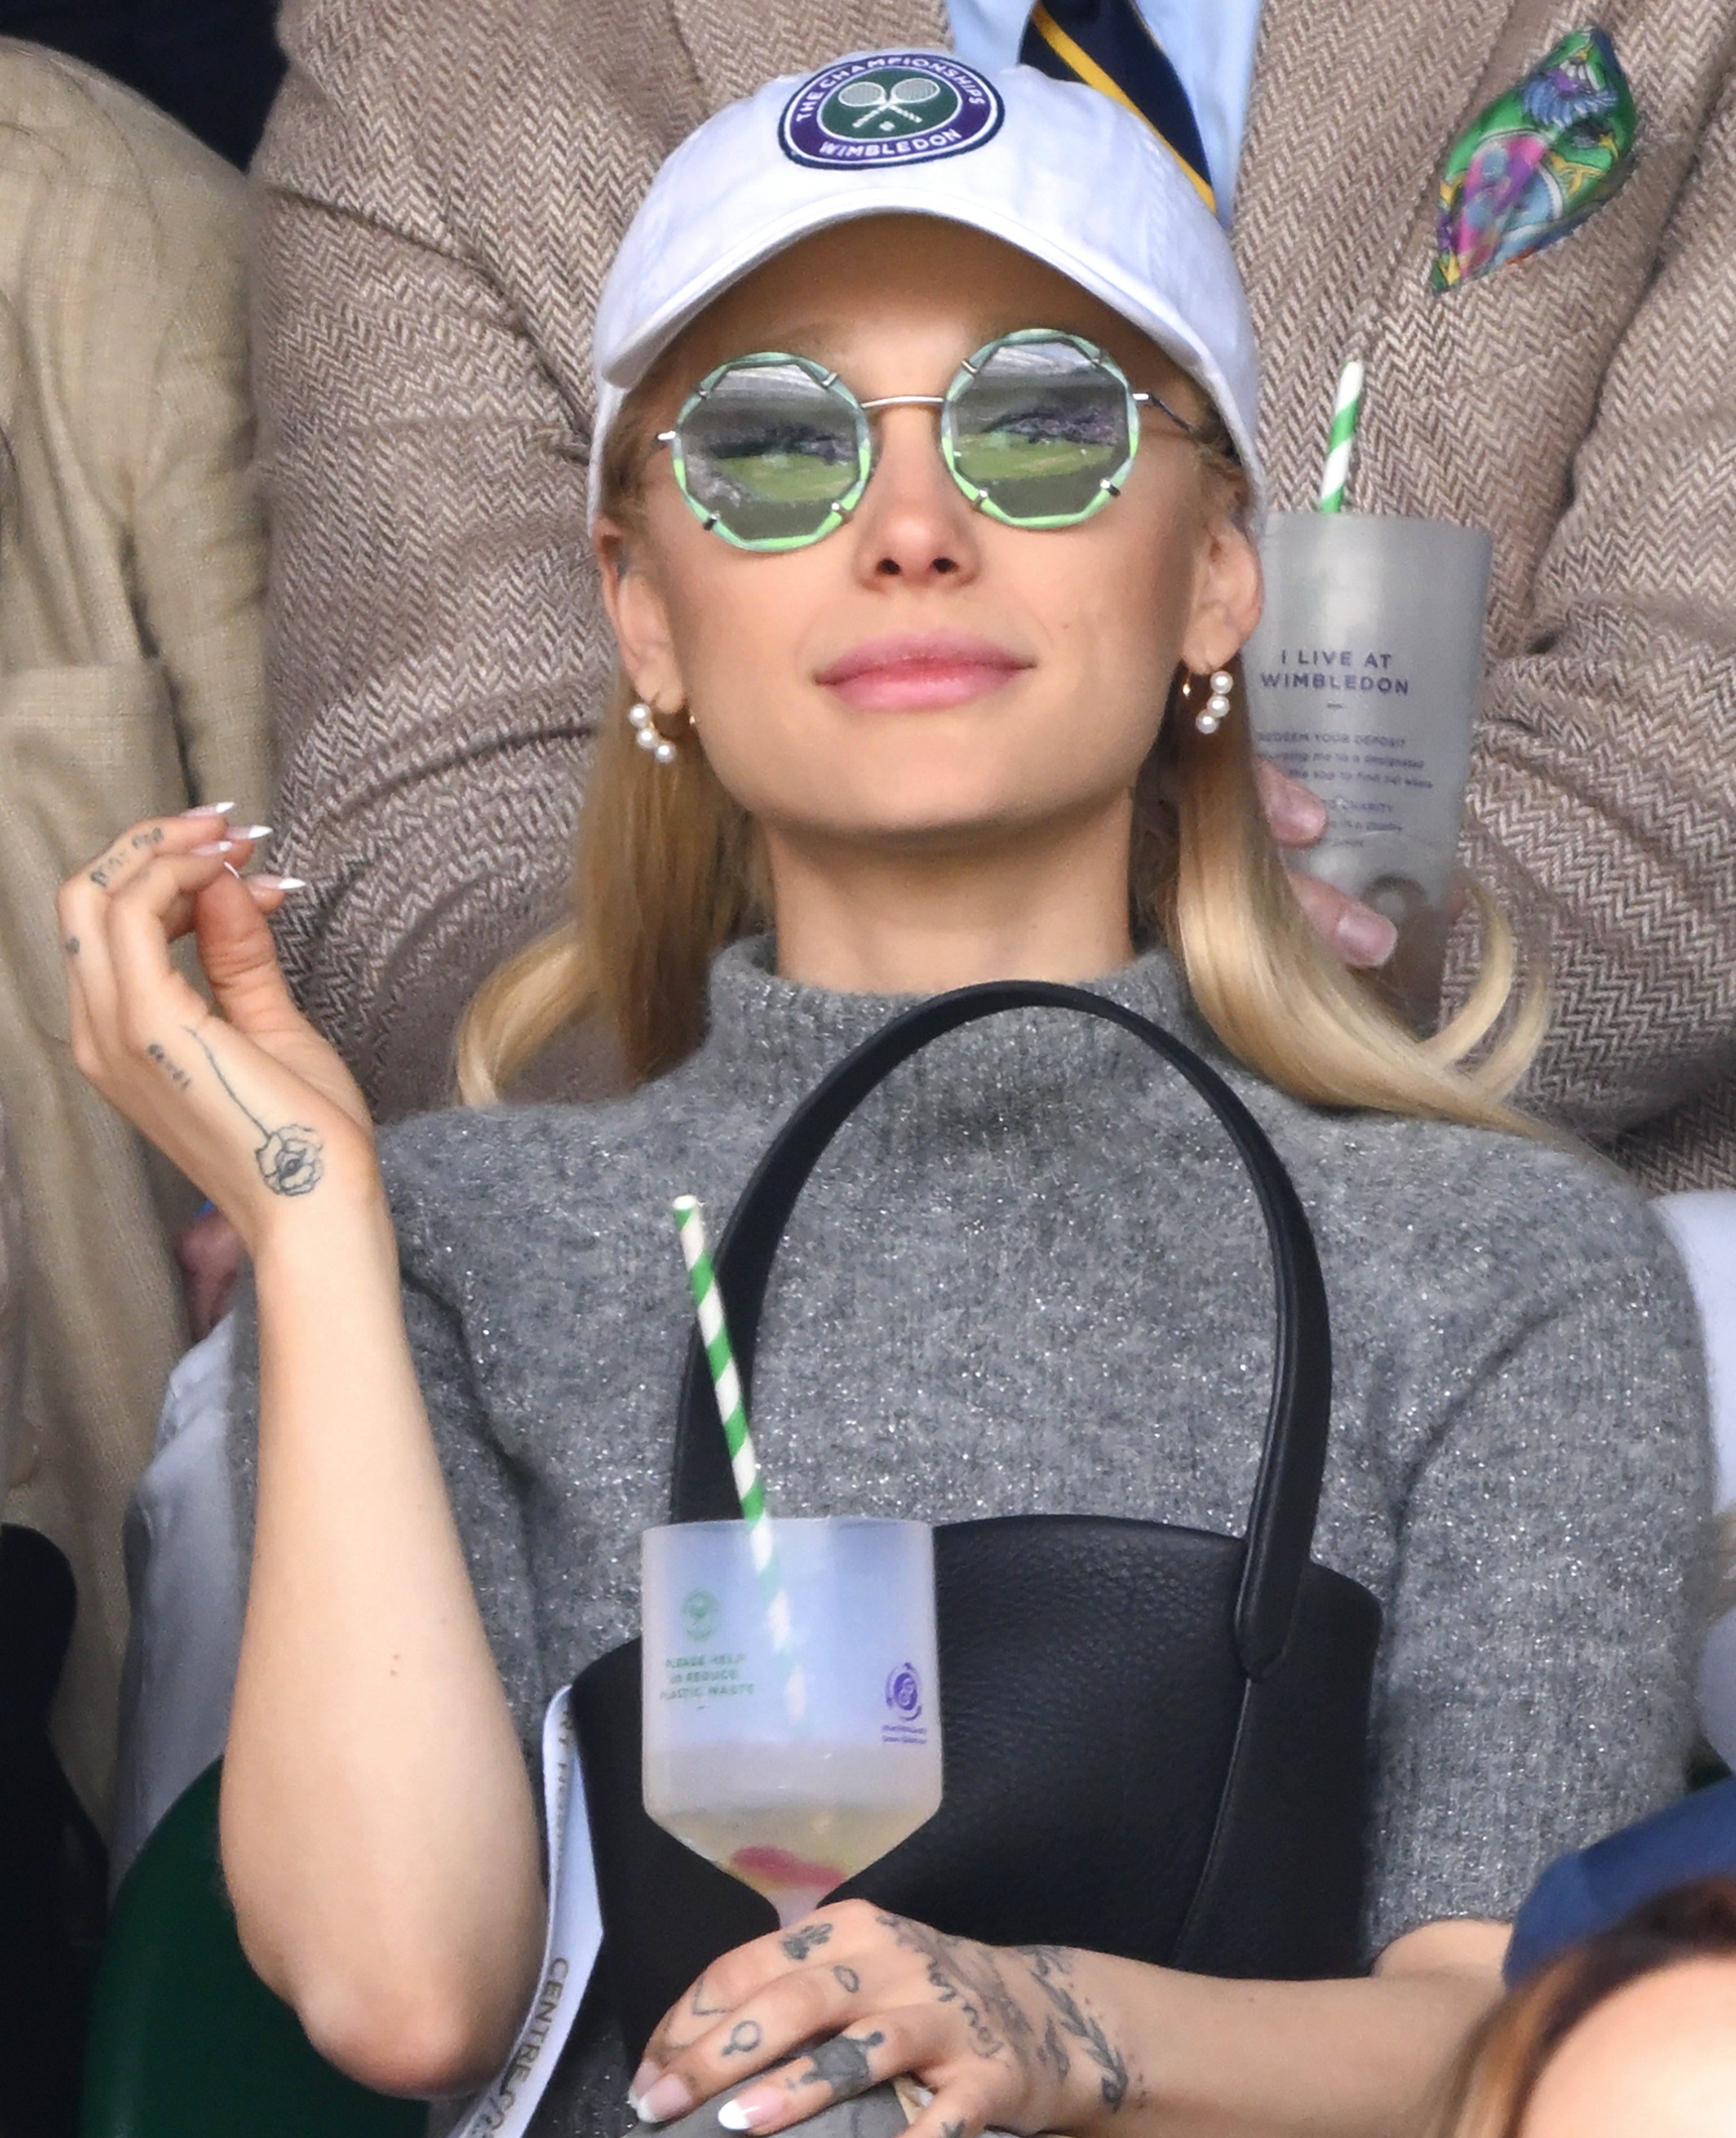 Ariana wears a baseball cap and sunglasses at an event and holds a drink